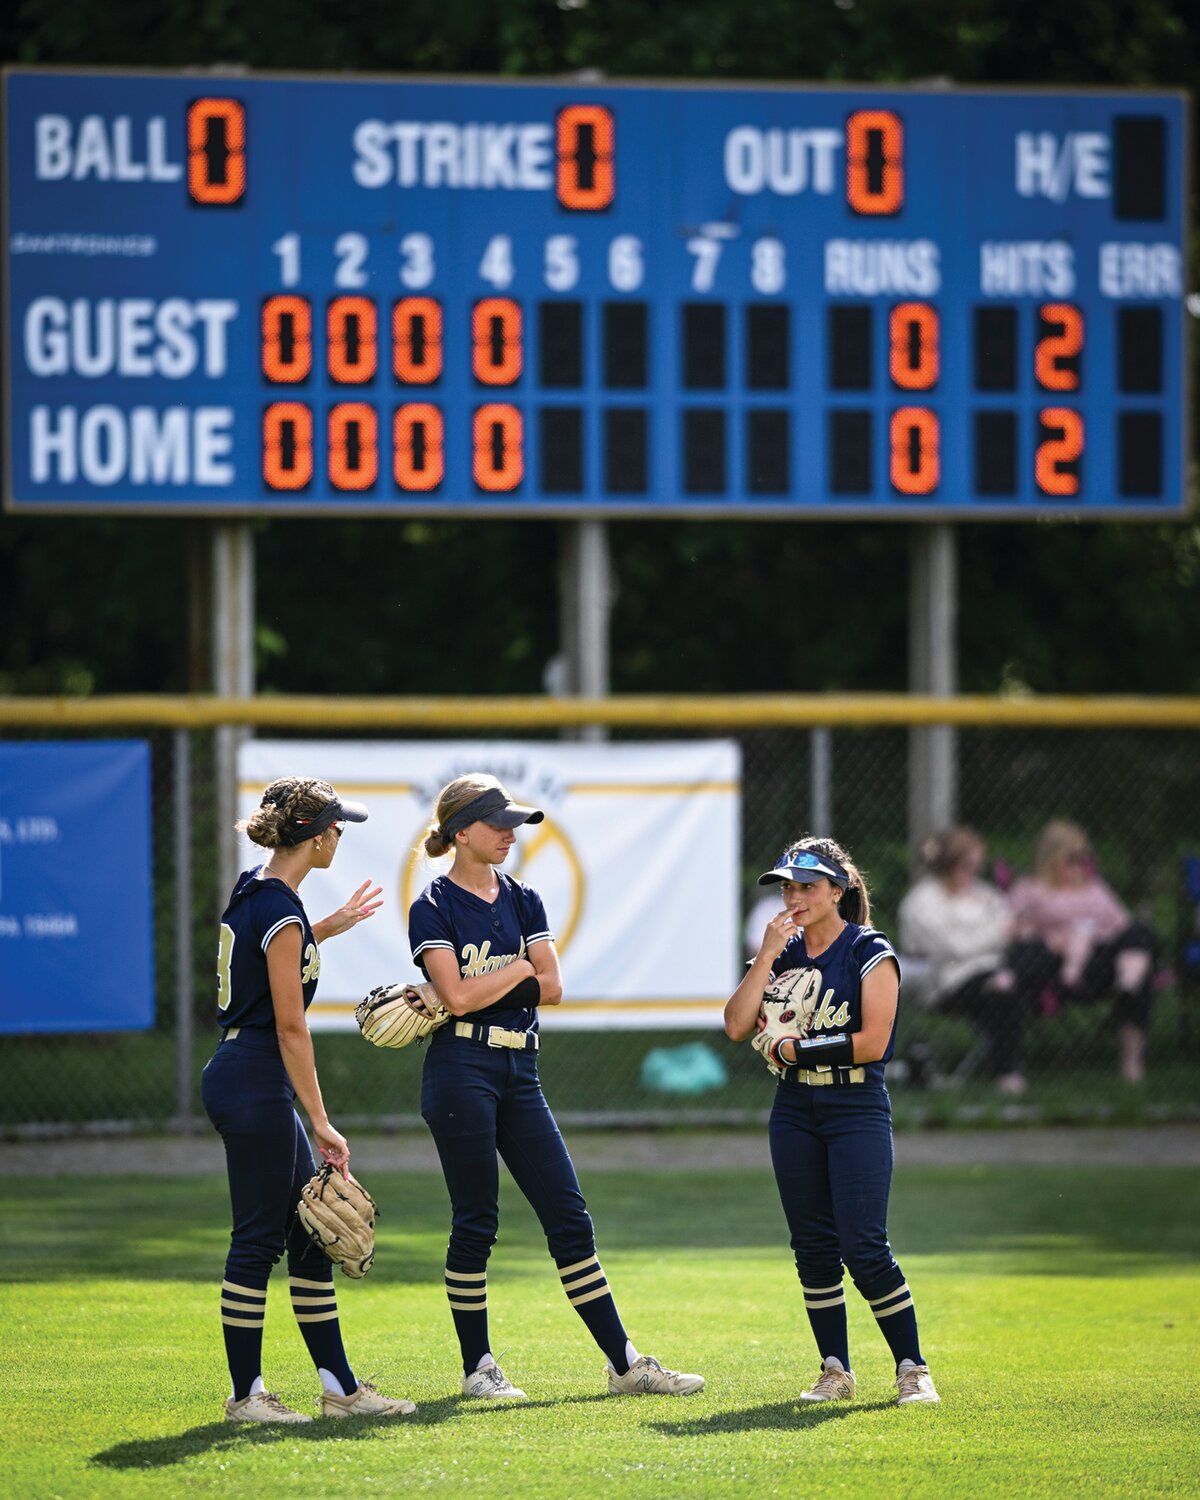 Council Rock South outfielders, from left, Maddie McLean, Helen Woloshyn and Gabby Bloom await the start of the fifth inning.